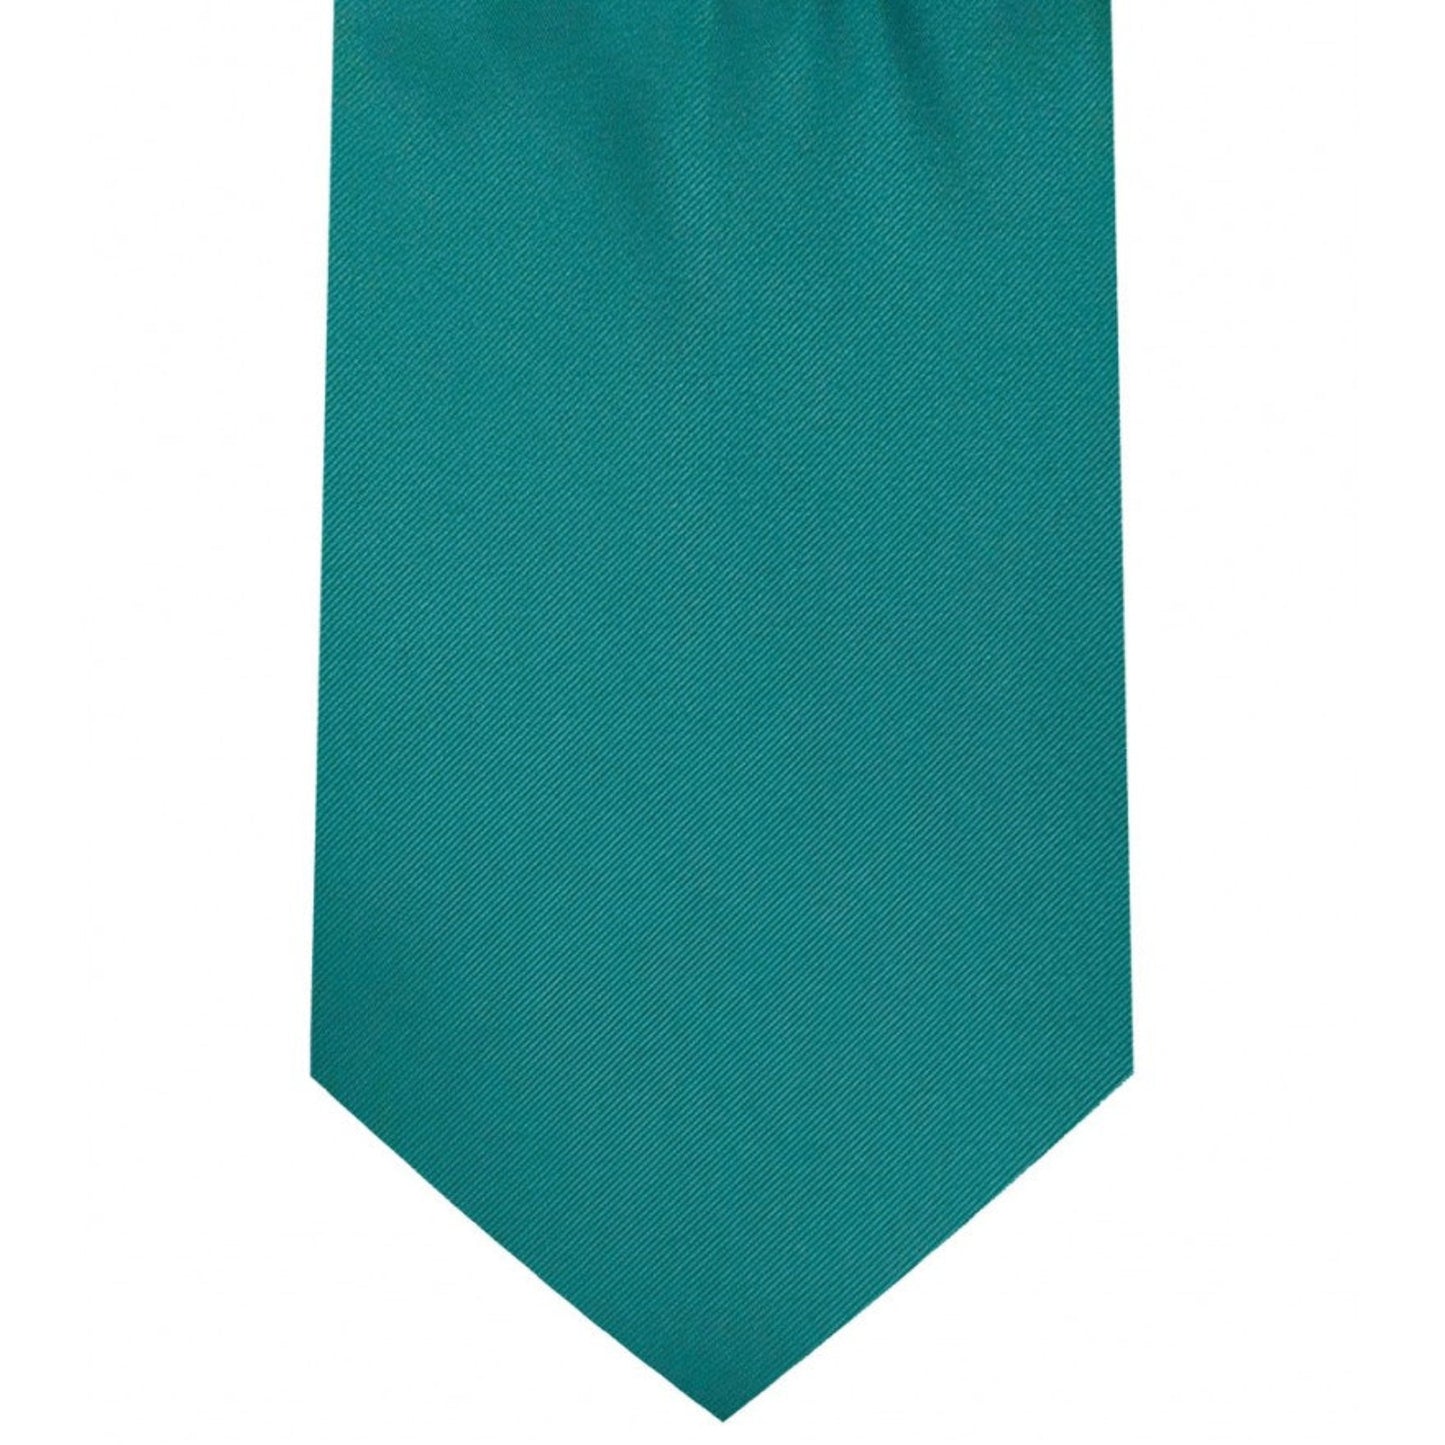 Classic Teal Tie Regular width 3.5 inches With Matching Pocket Square | KCT Menswear